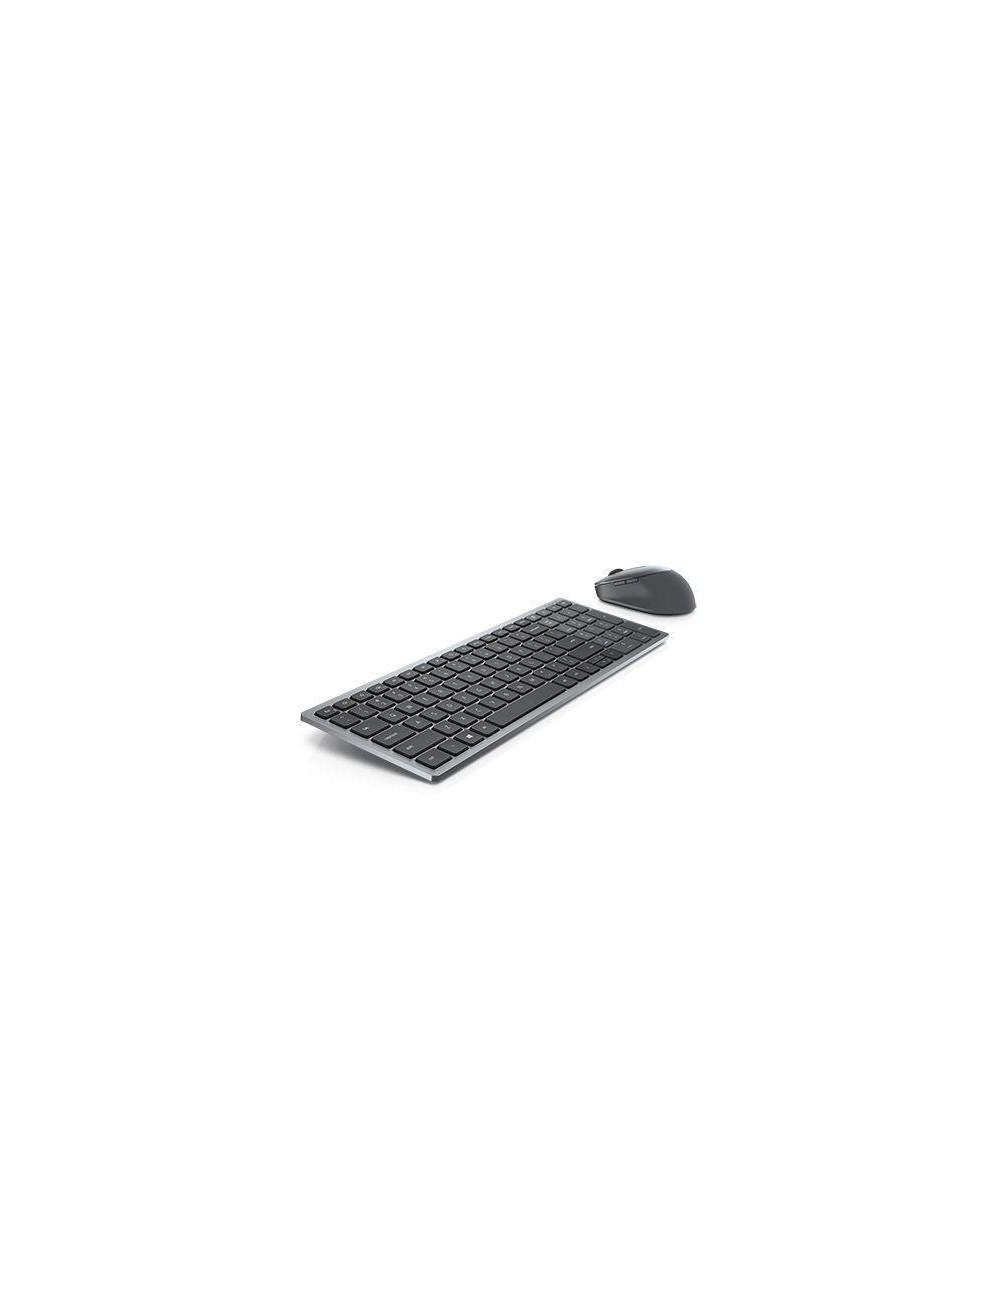 KEYBOARD +MOUSE WRL KM7120W/RUS 580-AIWS DELL